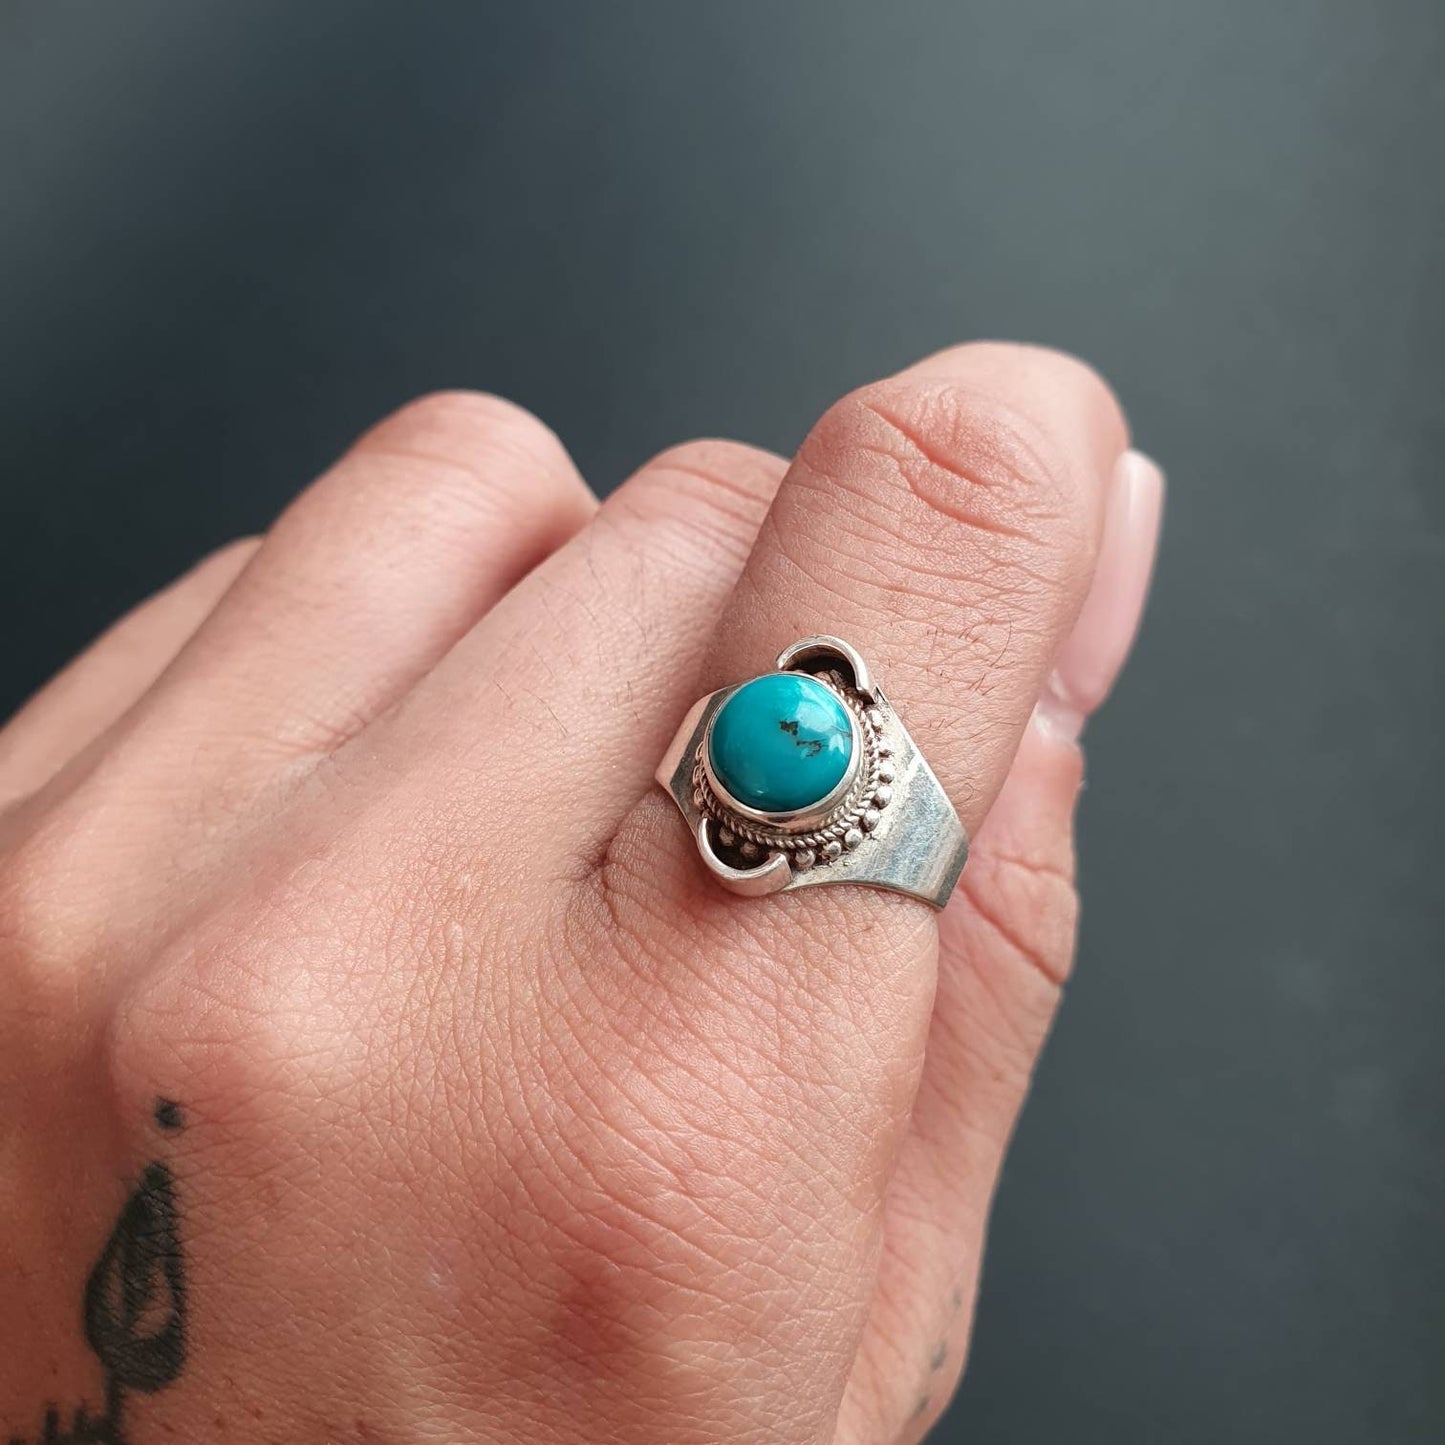 Saddle ring,Turquoise gemstone ring,Turquoise gemstones, statement ring, gifts for all occasions ,sterling silver, unique gift,